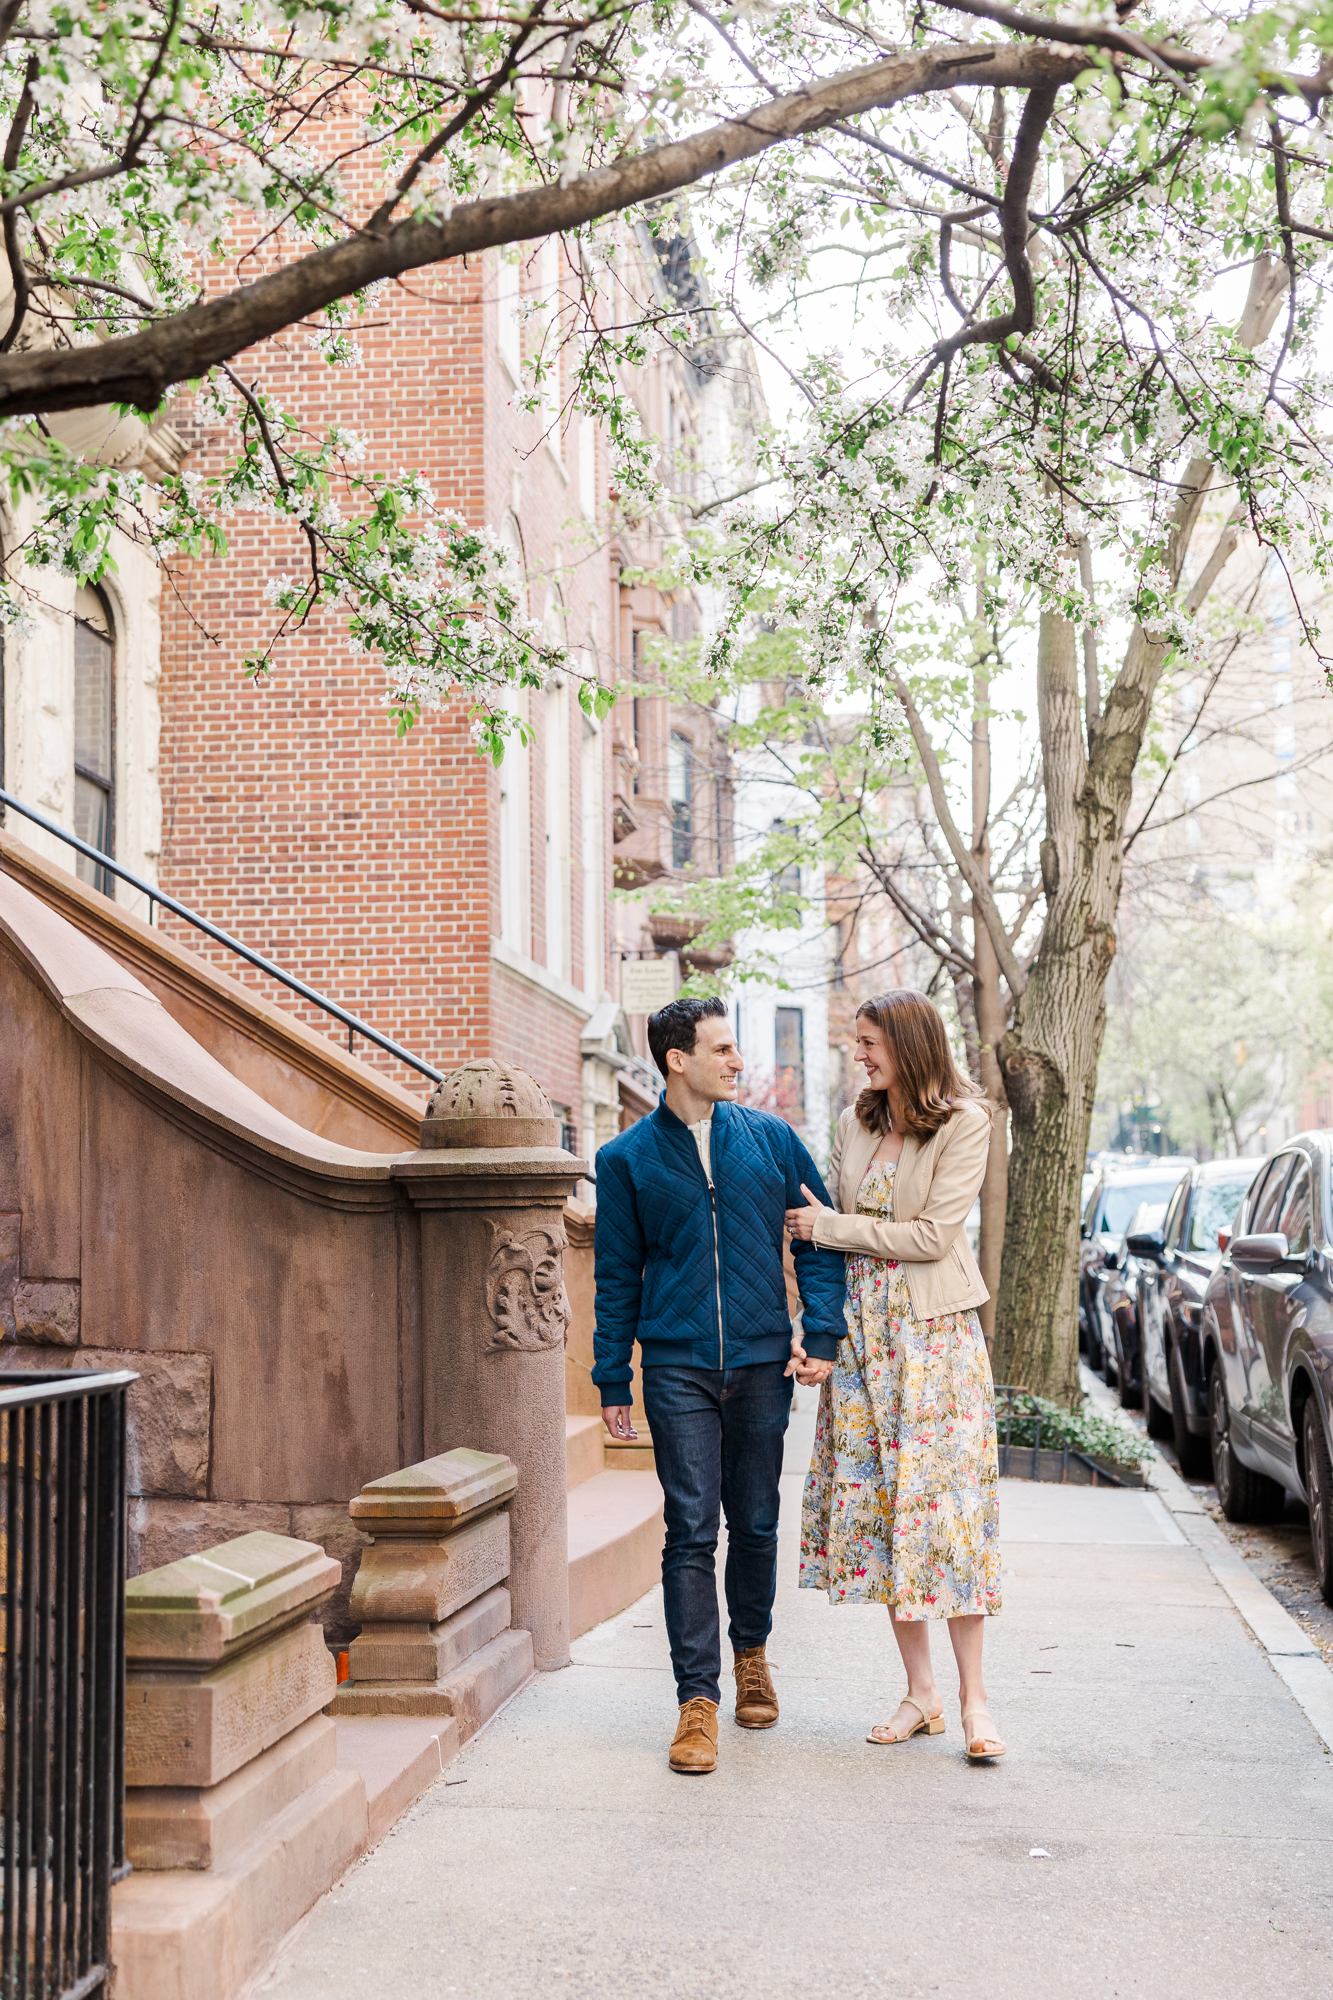 Special Upper East Side Engagement Photo Shoot in Spring